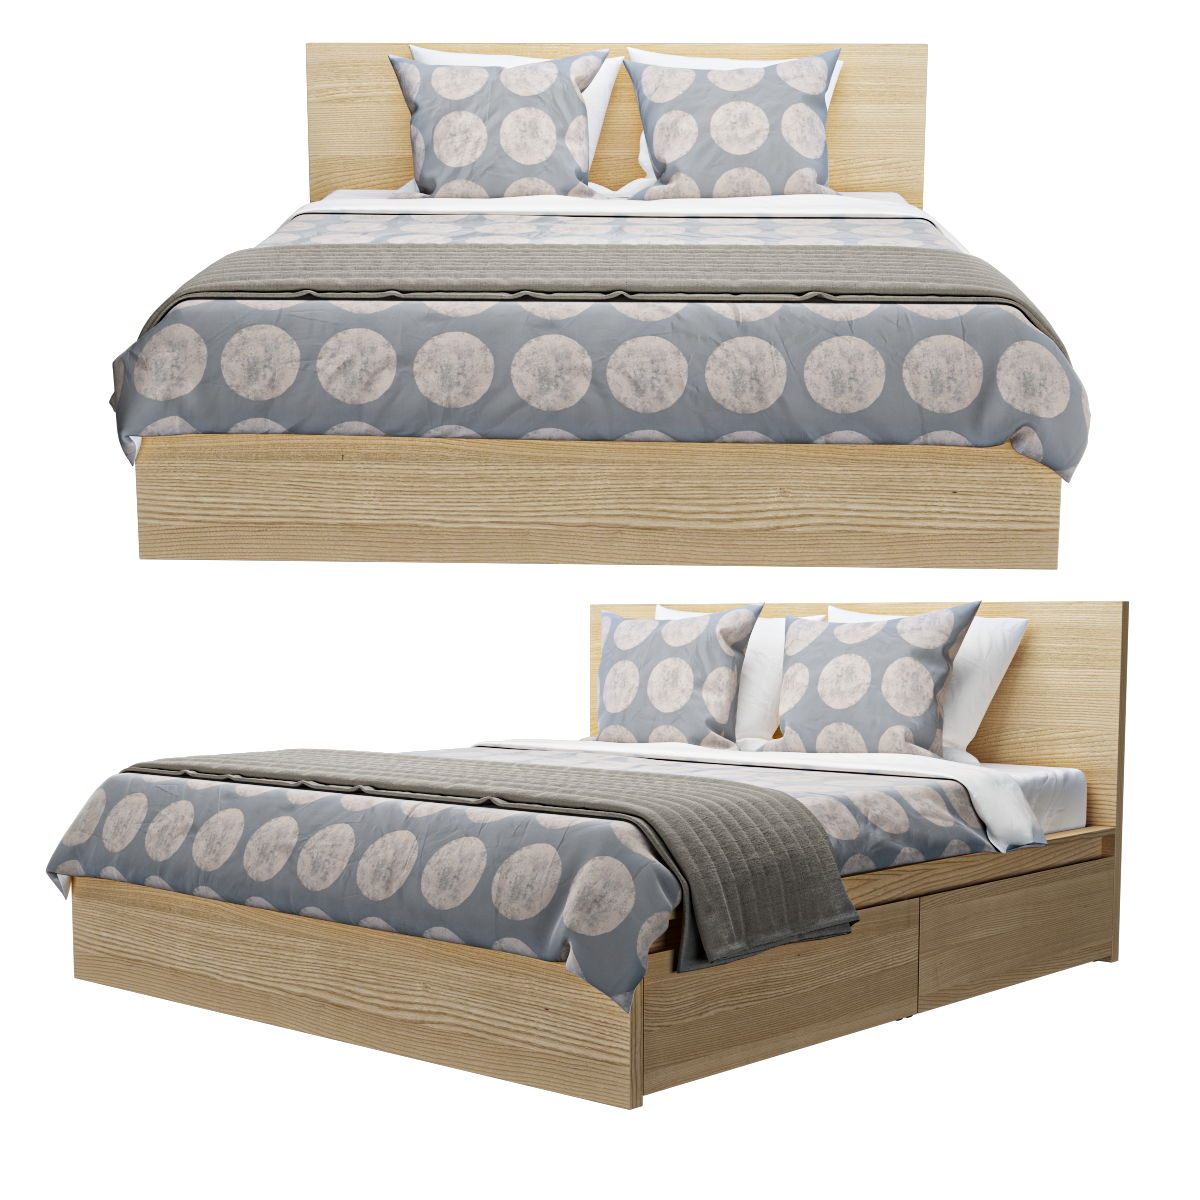 Bed Malm - Download the 3D Model (25453) | zeelproject.com